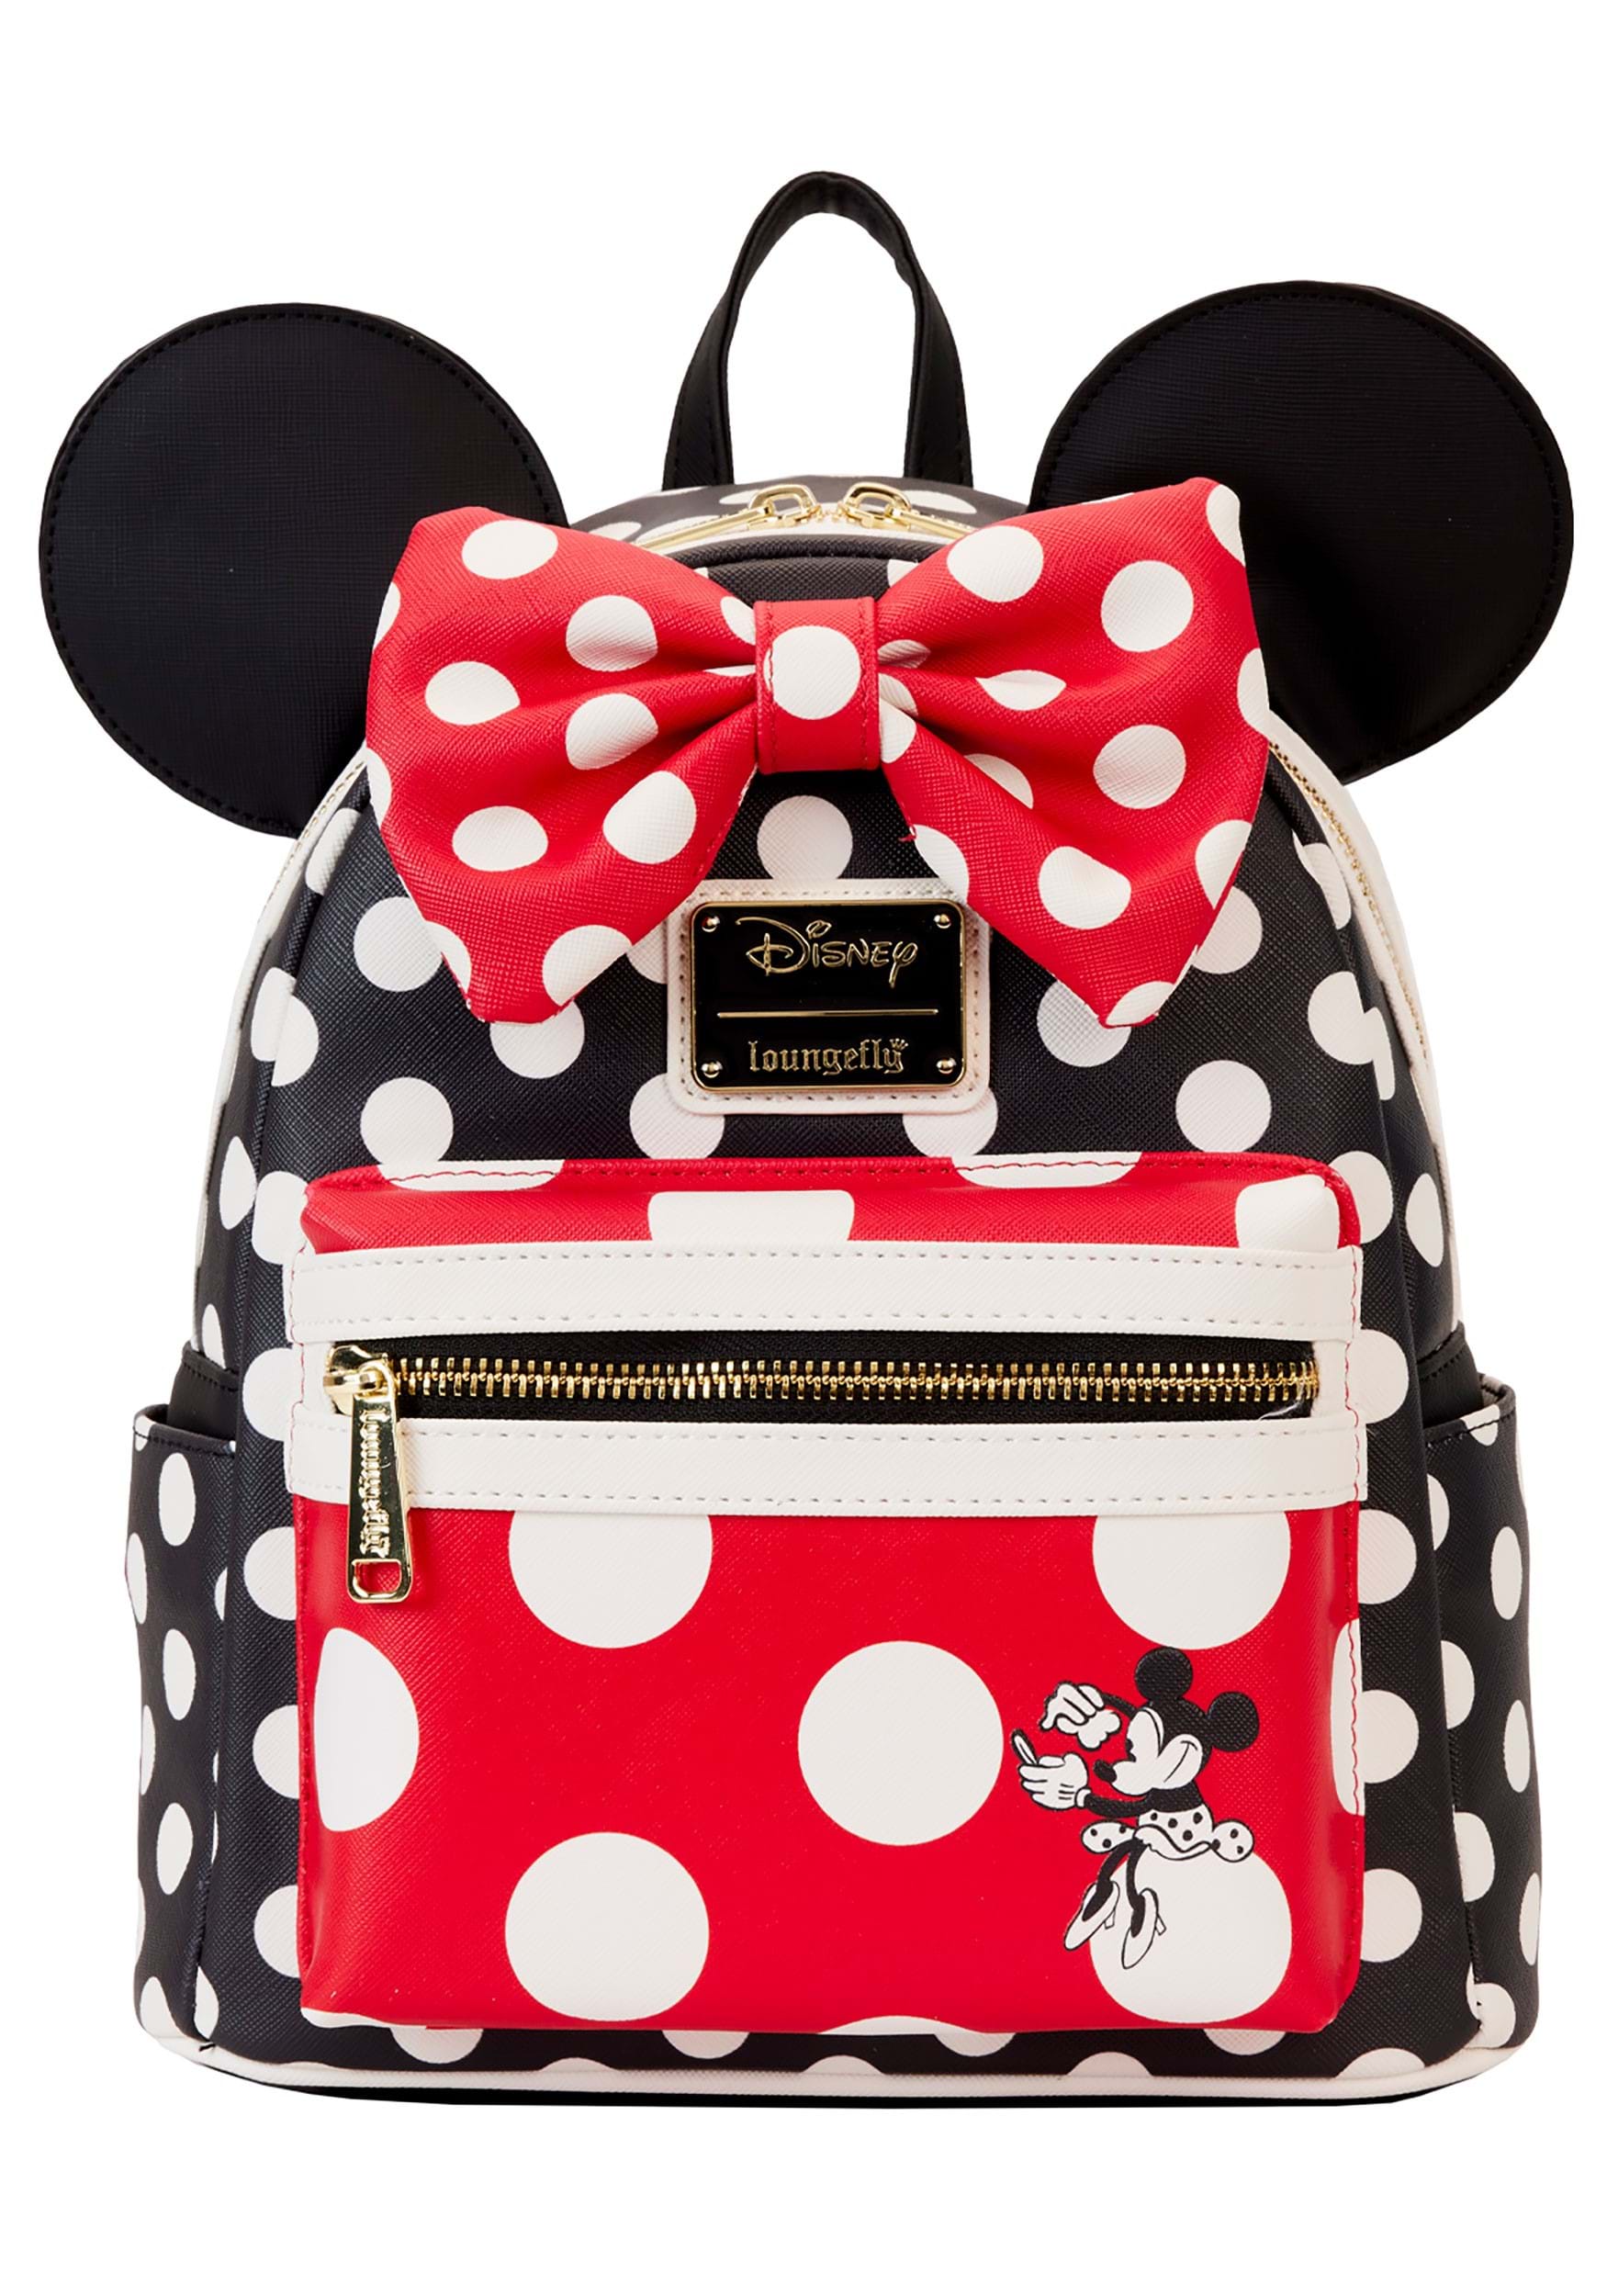 Minnie Mouse Rocks the Dots Classic Loungefly Mini Backpack